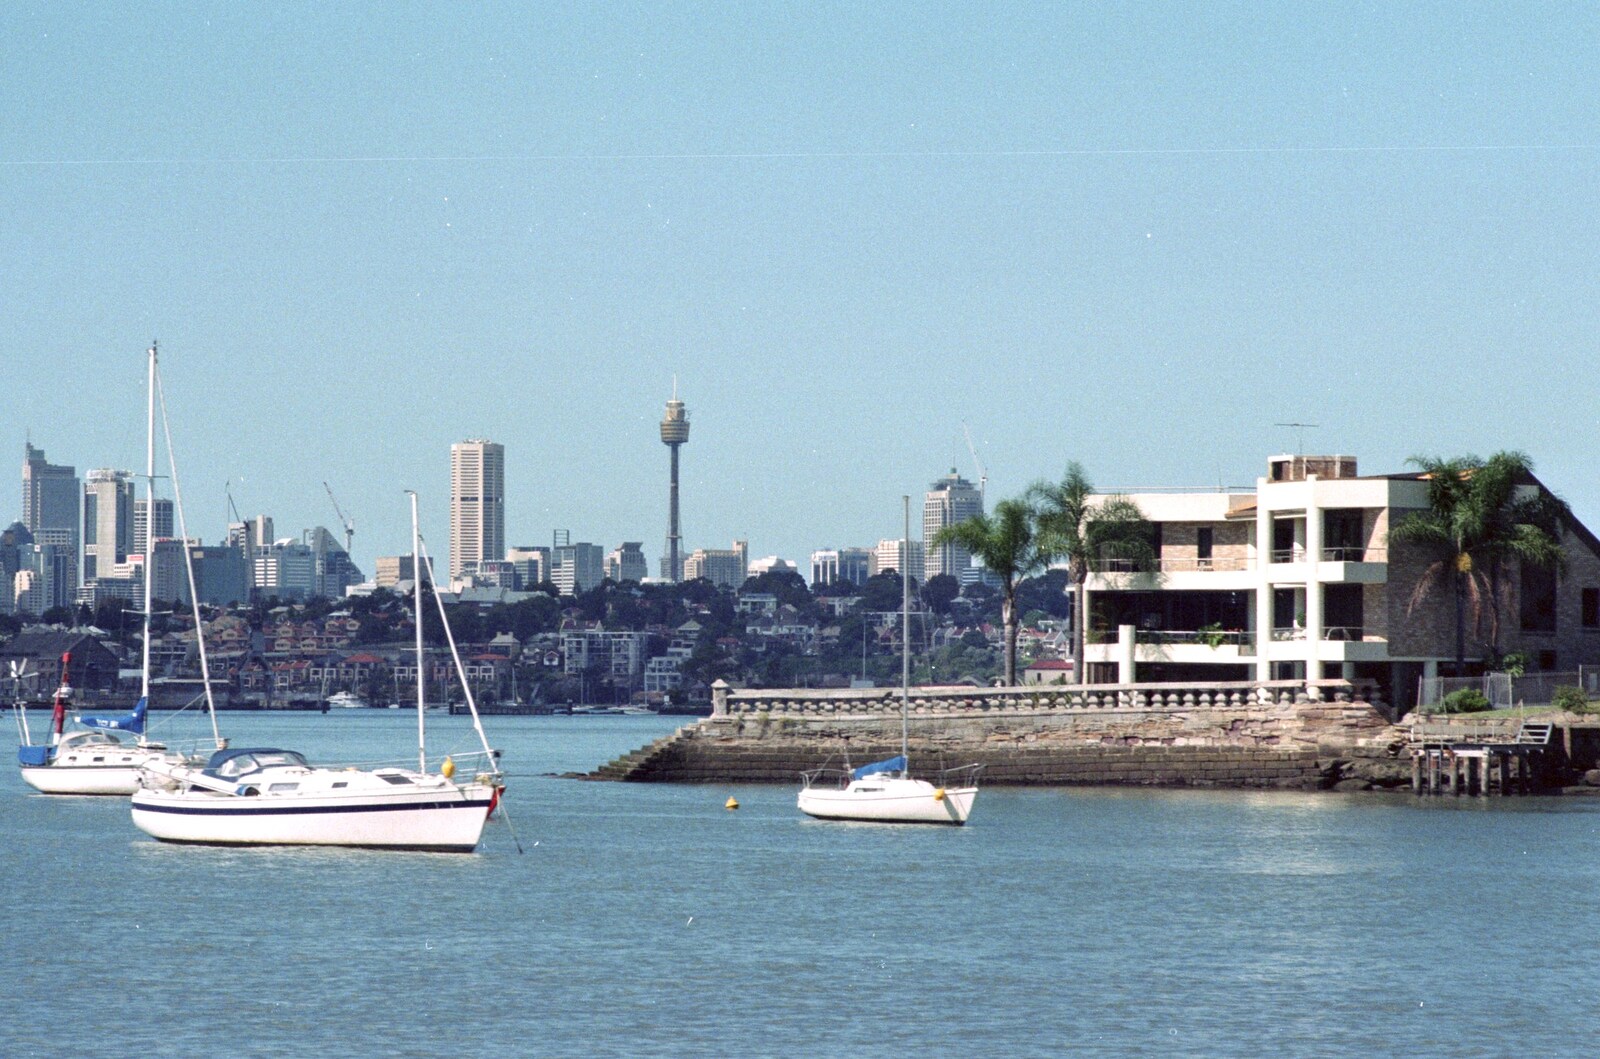 The Sydney Tower as seen from the Parramatta River from A Trip to the Blue Mountains, New South Wales, Australia - 12th April 2000